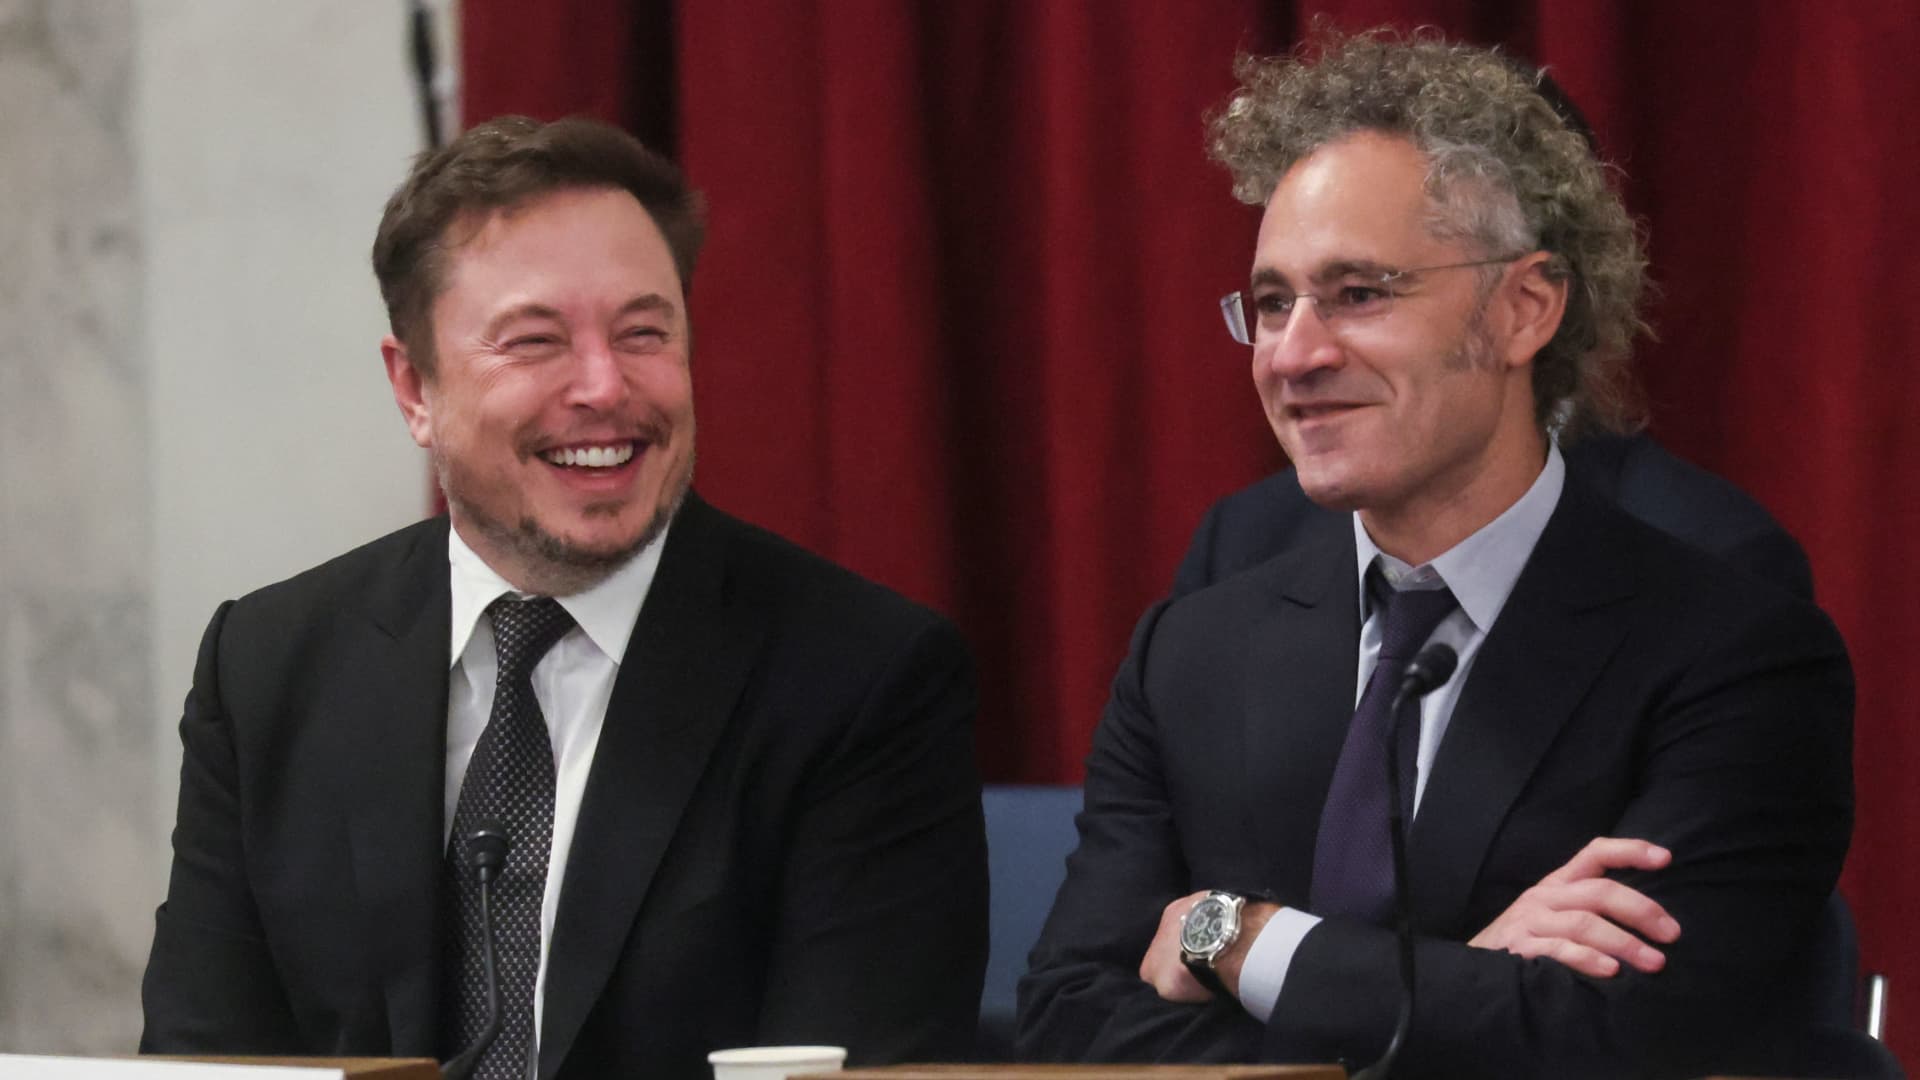 Elon Musk, Mark Zuckerberg, Bill Gates and other tech leaders in closed Senate session about AI